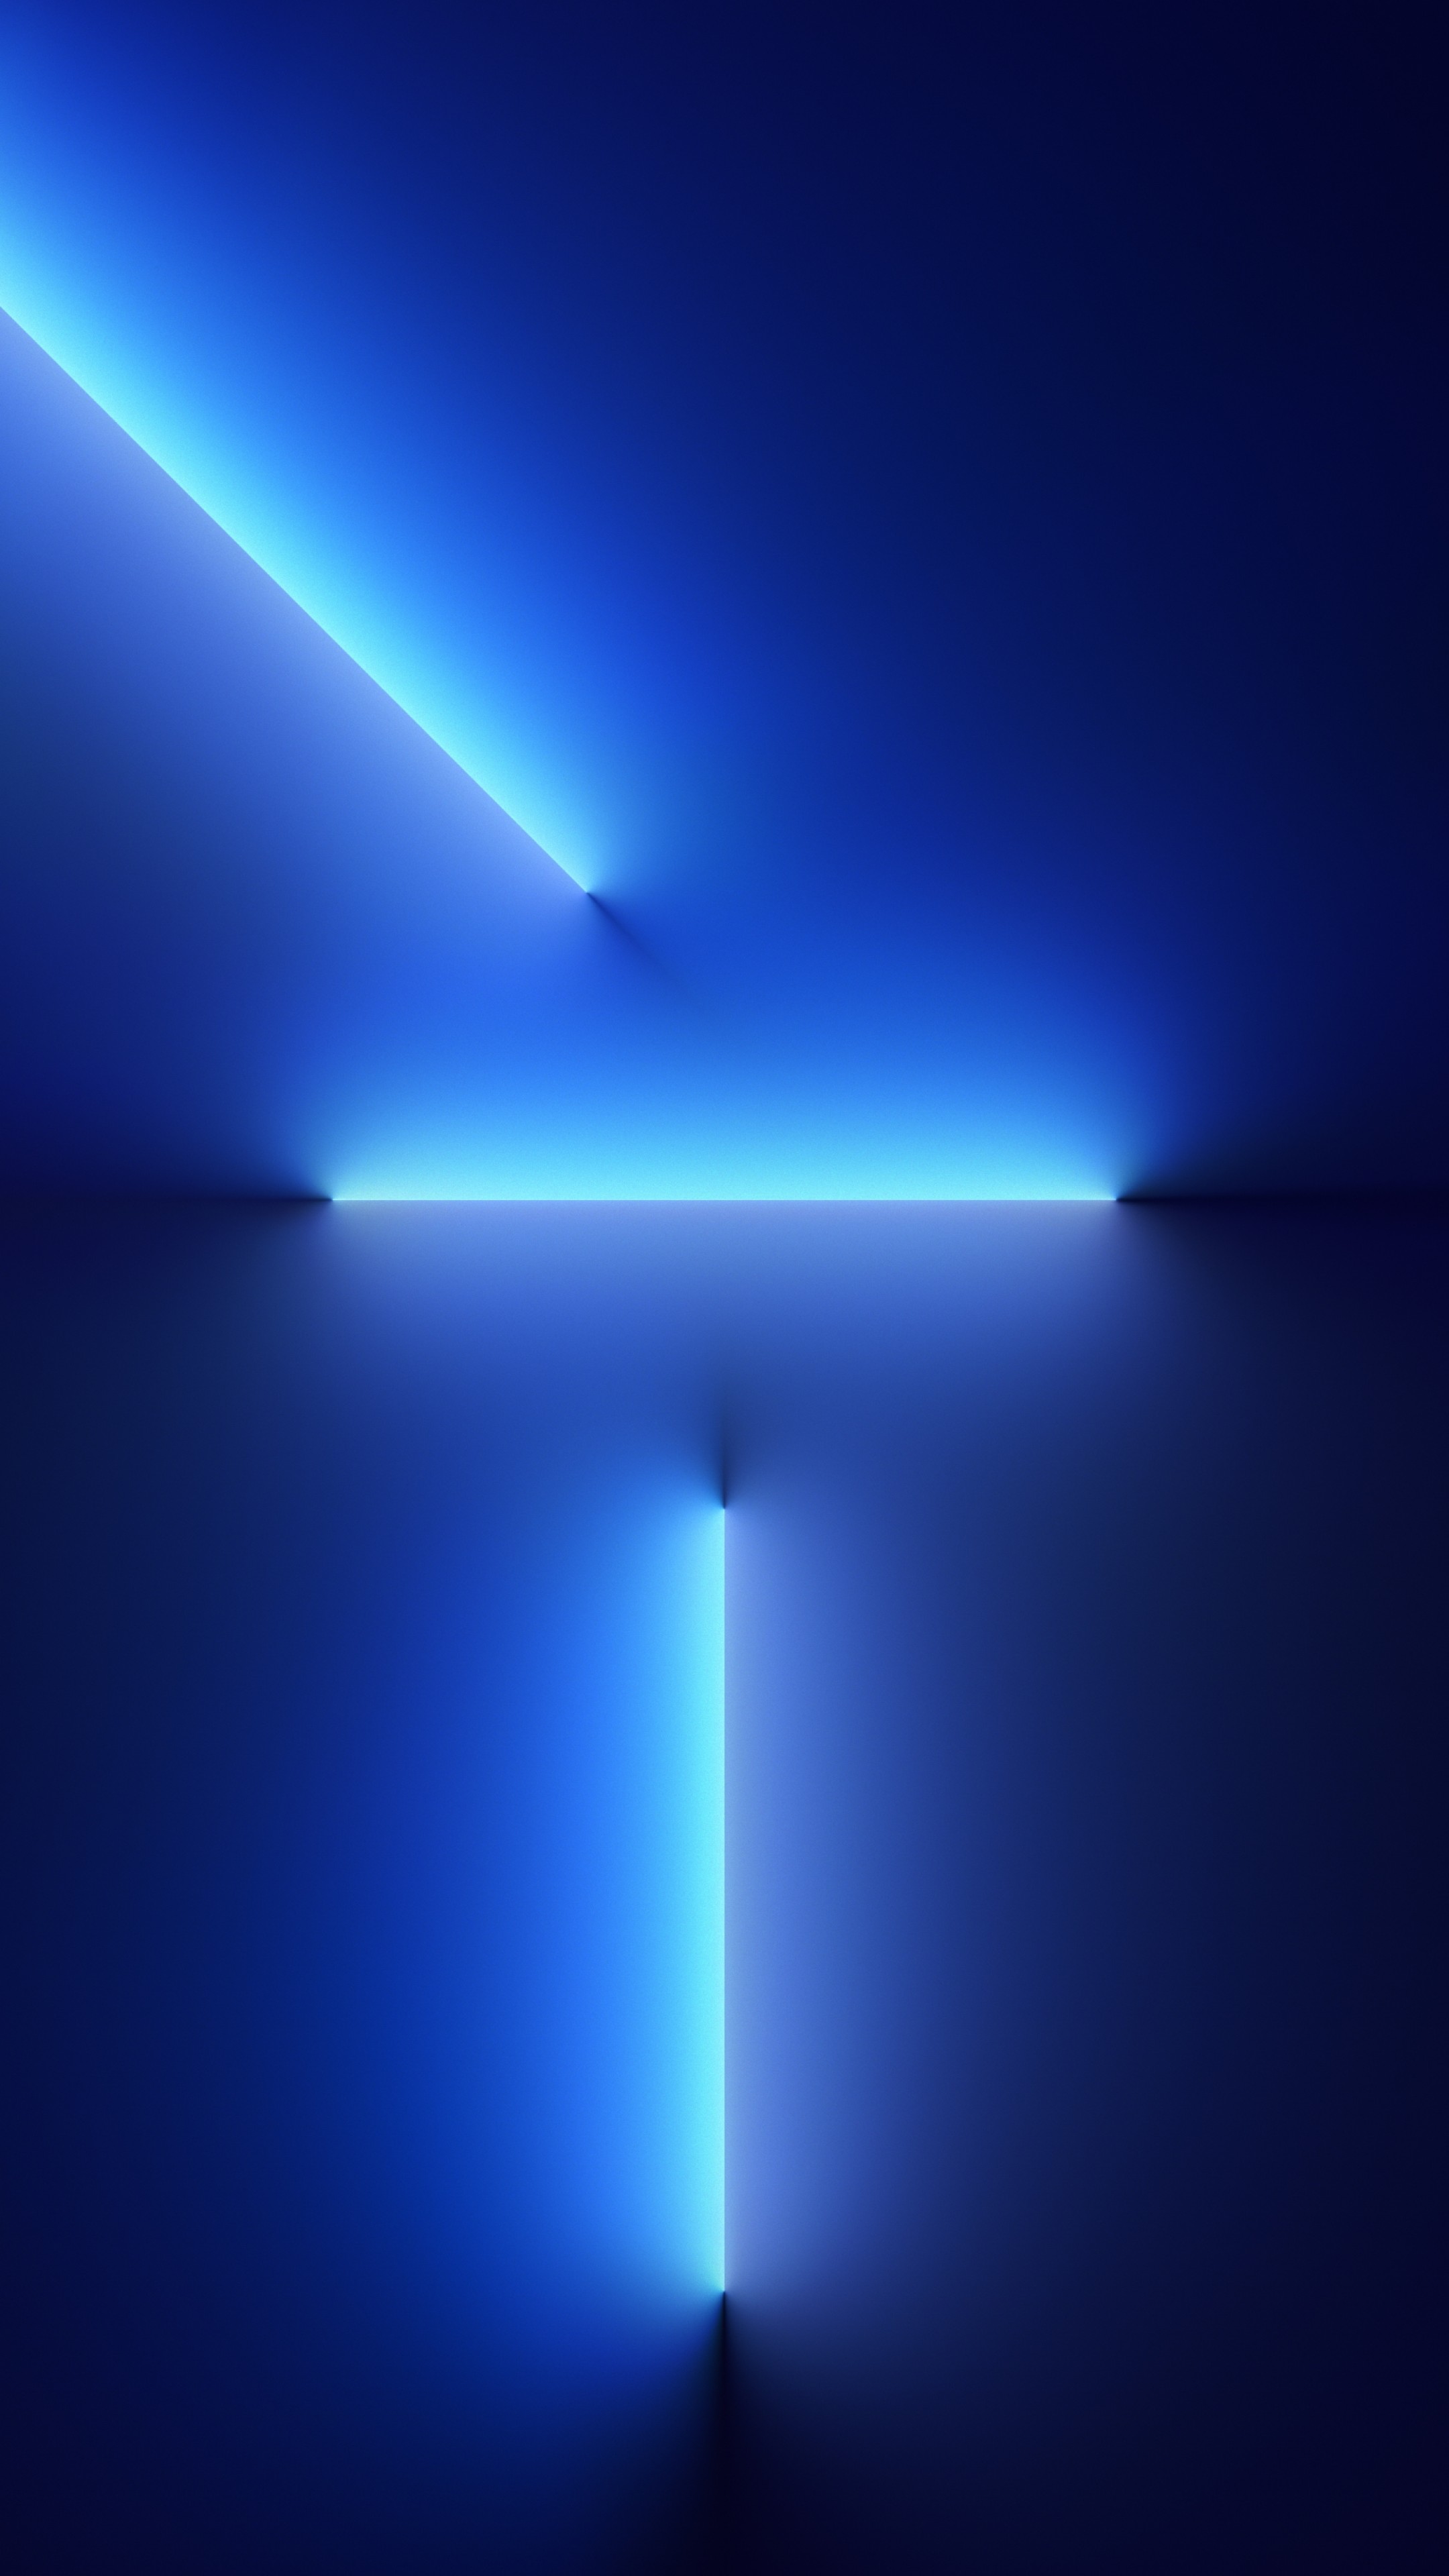 Wallpaper iPhone 13 Pro, light beams, abstract, iOS Apple September 2021 Event, 4K, OS